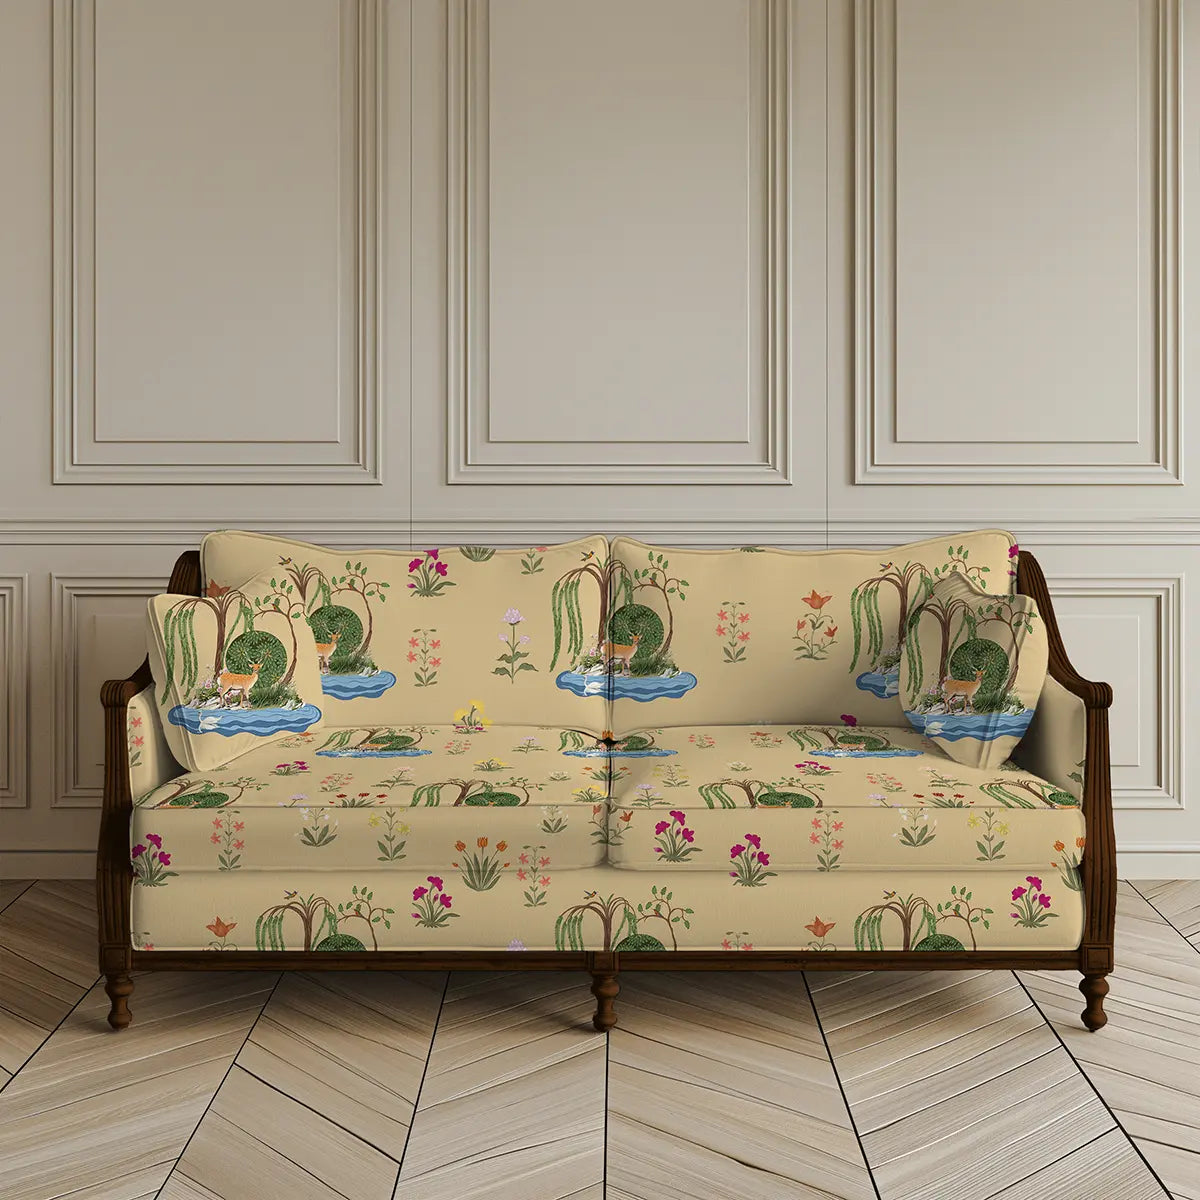 Malhar Sofa and Chairs Upholstery Fabric Beige Indian Floral Buy now